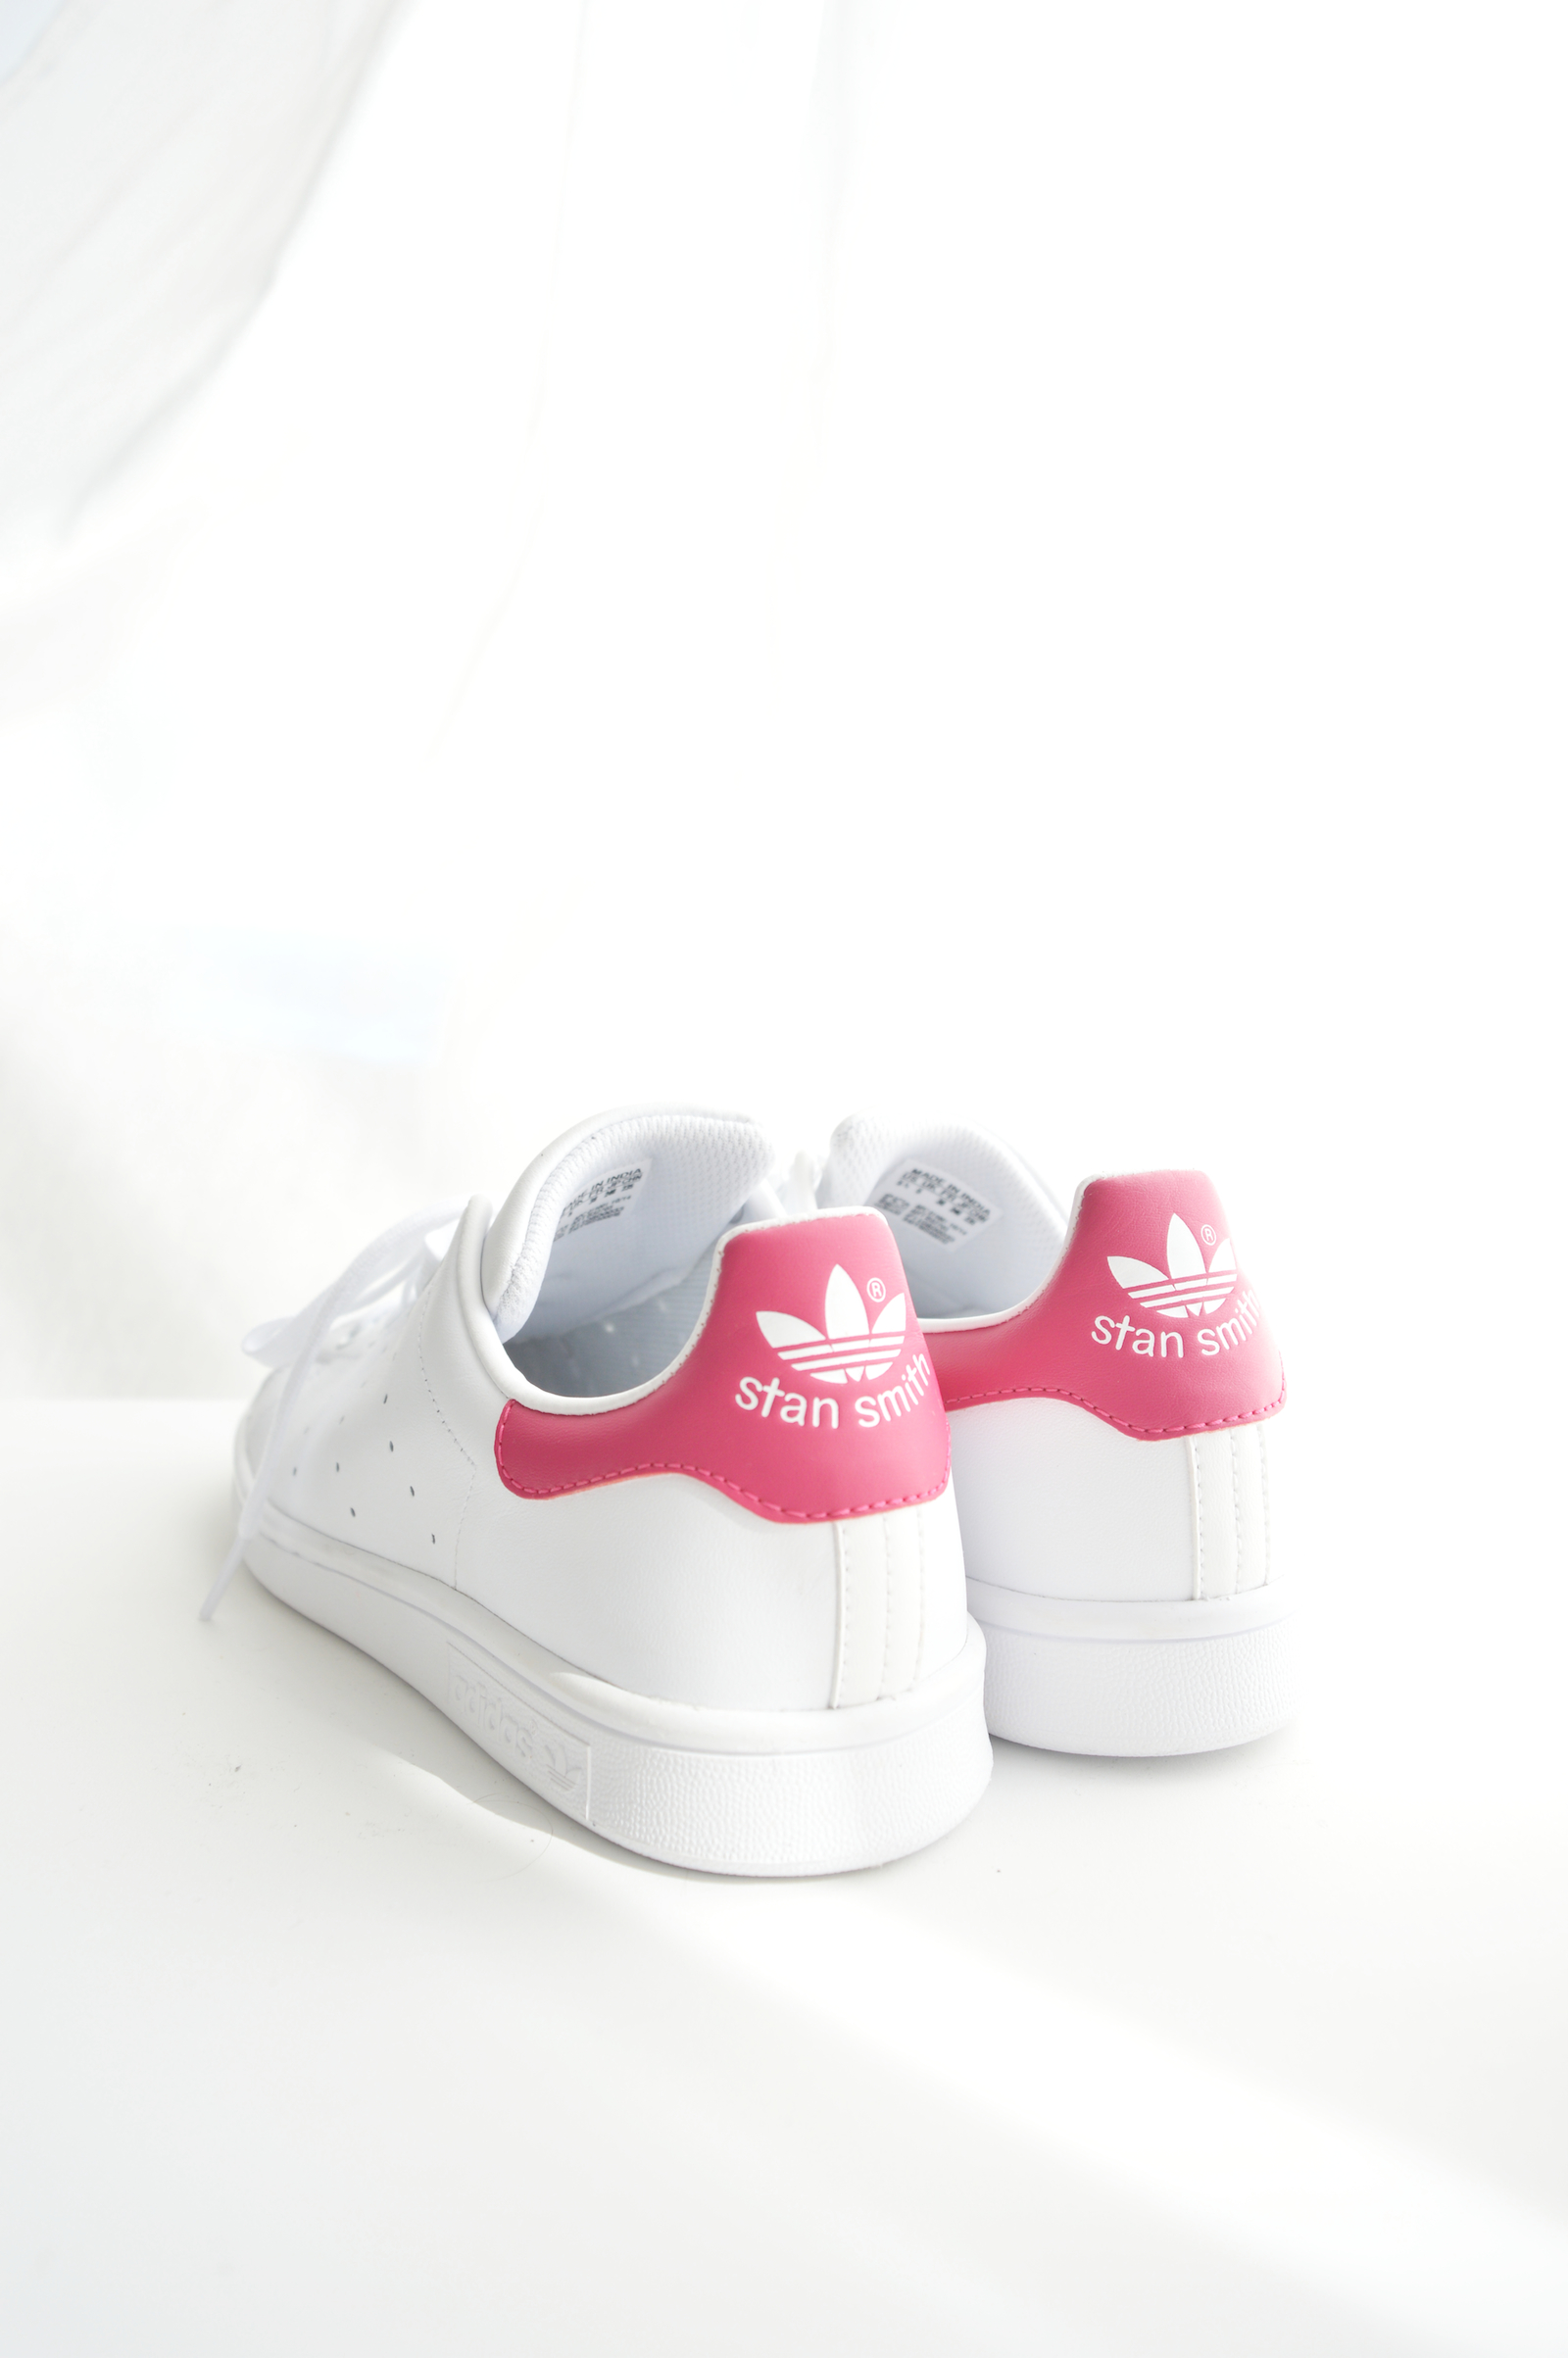 adidas homme stan smith moin cher